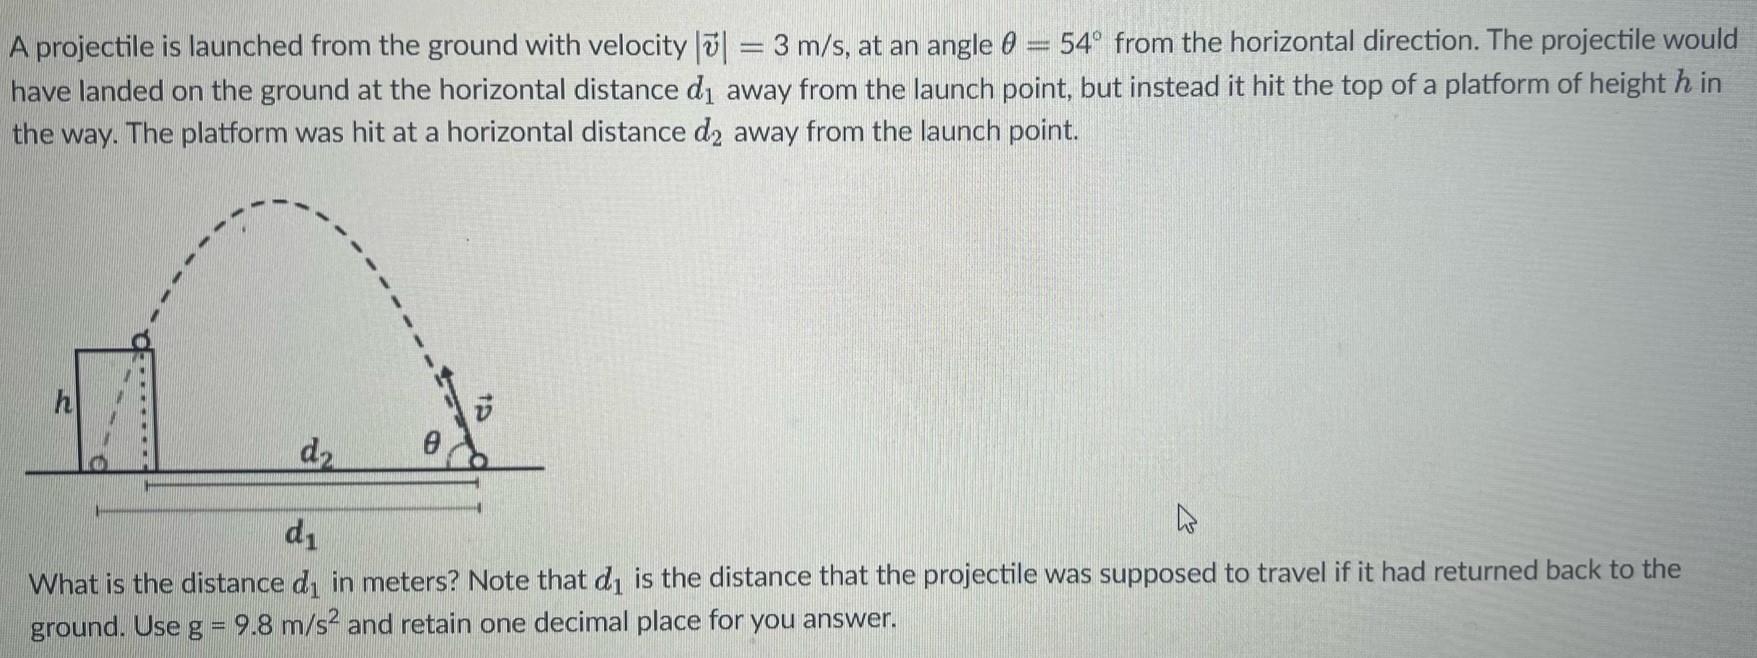 A projectile is launched from the ground with velocity |v→| = 3 m/s, at an angle θ = 54∘ from the horizontal direction. The projectile would have landed on the ground at the horizontal distance d1 away from the launch point, but instead it hit the top of a platform of height h in the way. The platform was hit at a horizontal distance d2 away from the launch point. What is the distance d1 in meters? Note that d1 is the distance that the projectile was supposed to travel if it had returned back to the ground. Use g = 9.8 m/s2 and retain one decimal place for you answer.